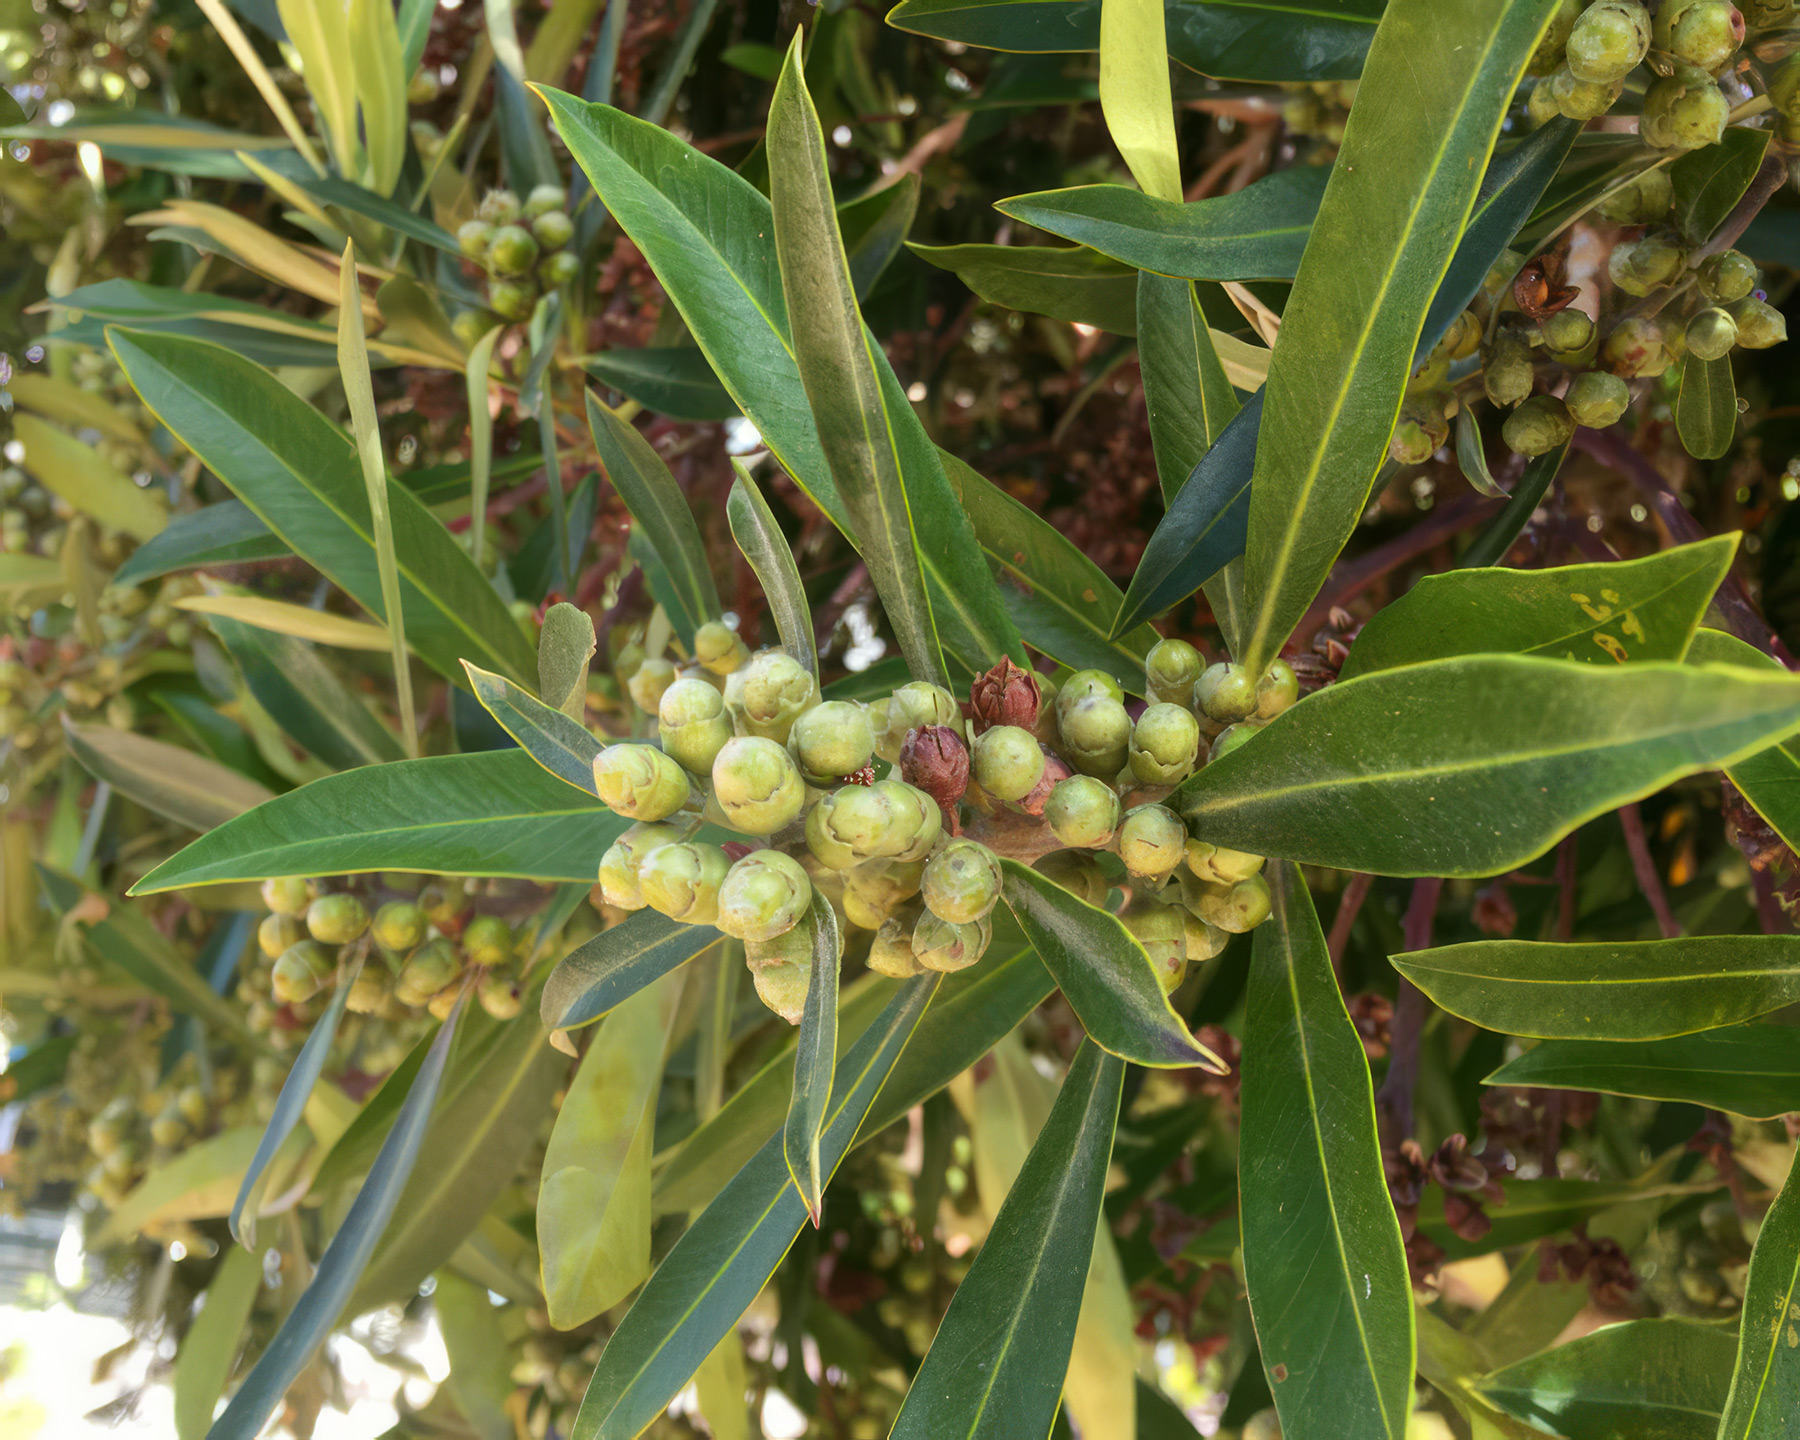 Clusters of round green fruit of Tristaniopsis laurina - The Water Gum